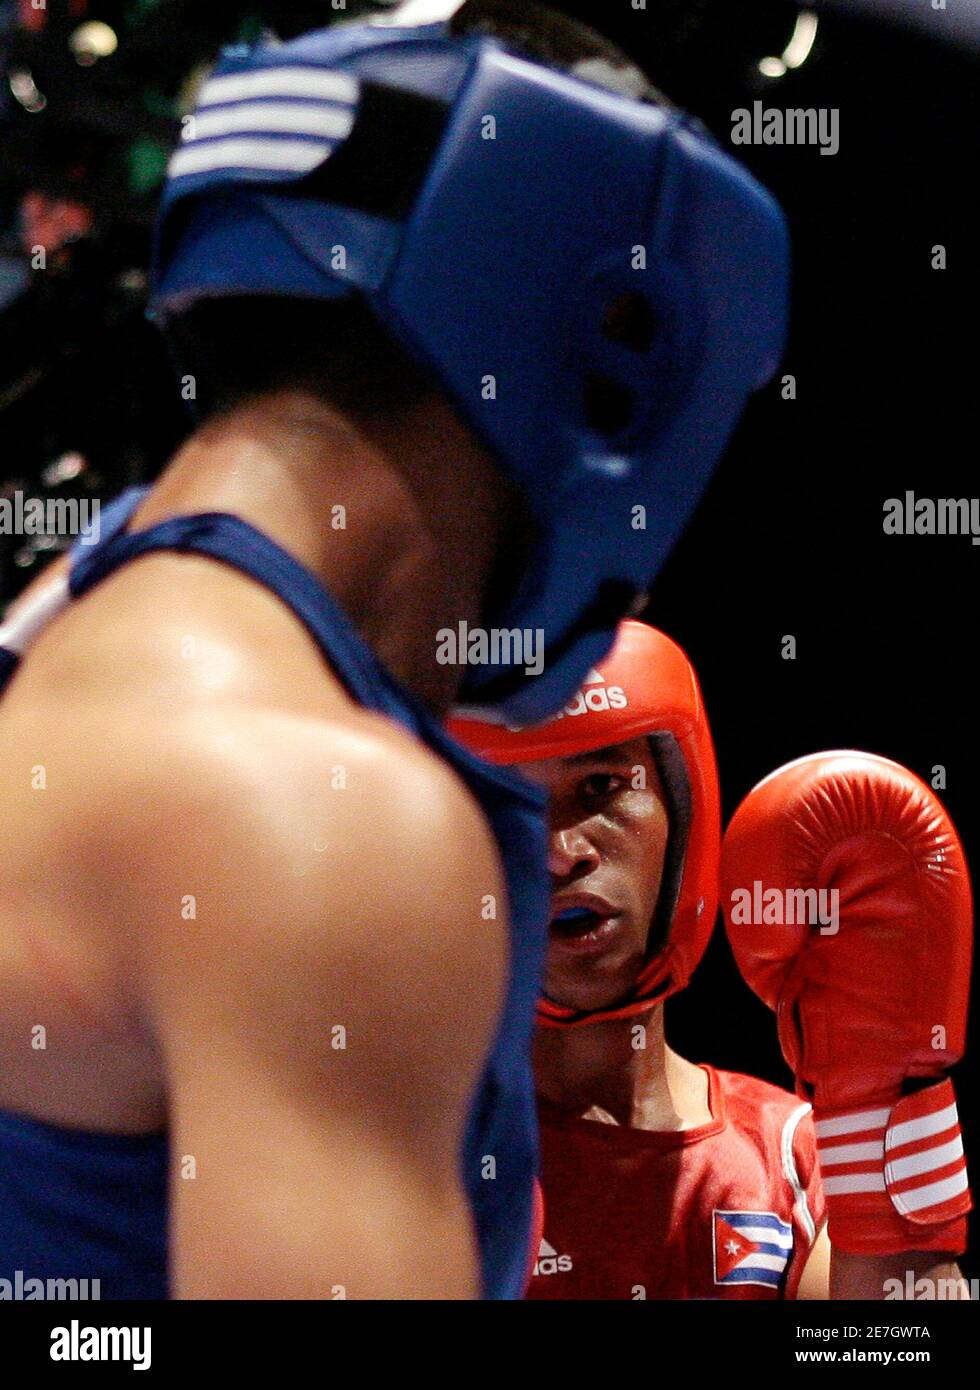 Roniel Iglesias Sotolongo (R) of Cuba and Frankie Gomez of the U.S. fight  during their AIBA Light Welterweight (64Kg) World Championships men's final  boxing match in Milan September 12, 2009. REUTERS/Alessandro Garofalo (